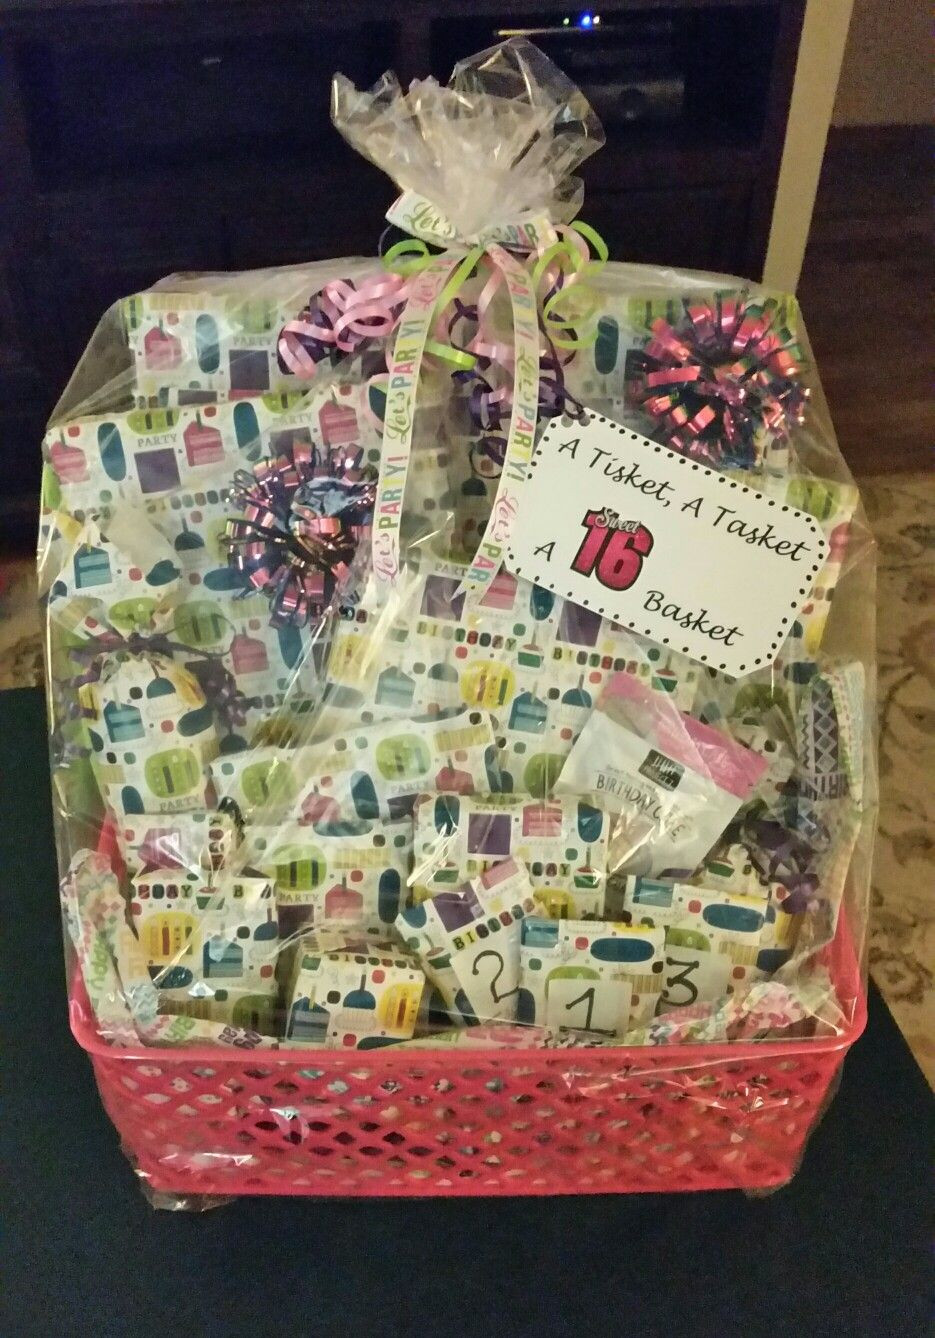 Sweet 16 Birthday Gift Ideas For A Girl
 A Tisket A Tasket A Sweet 16 Basket Filled with 16